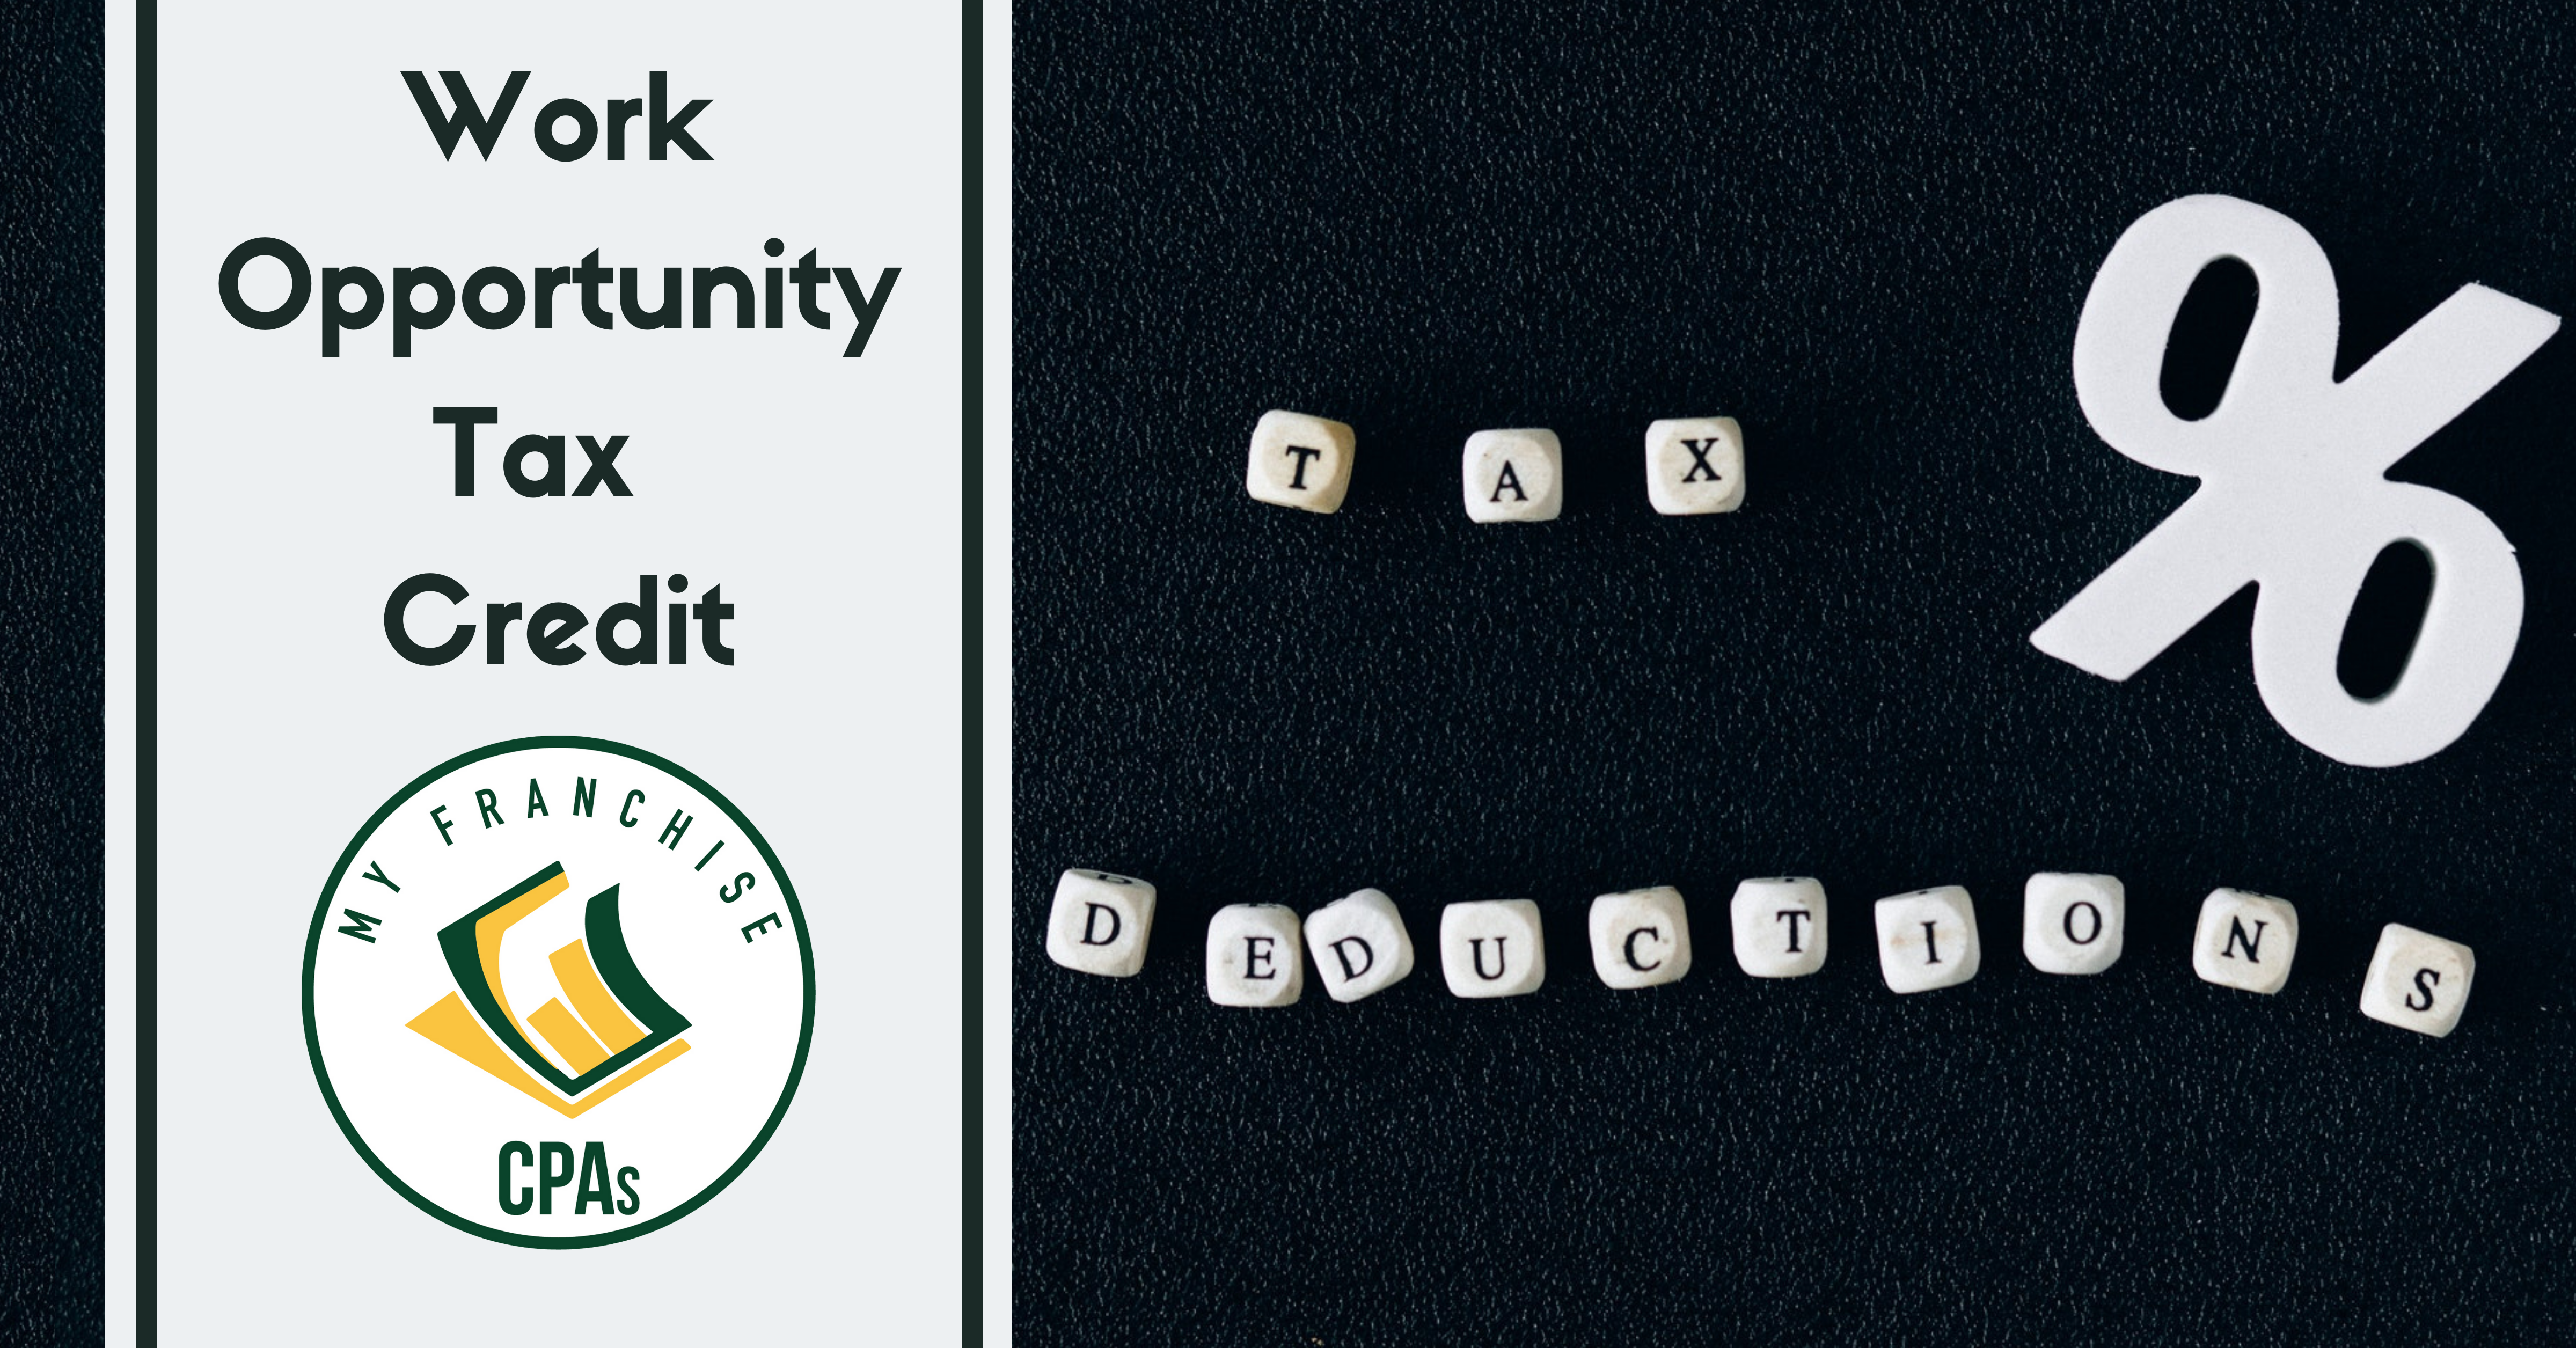 Work Opportunity Tax Credit Program, WOTC Tax Deduction, WOTC Franchise Accounting